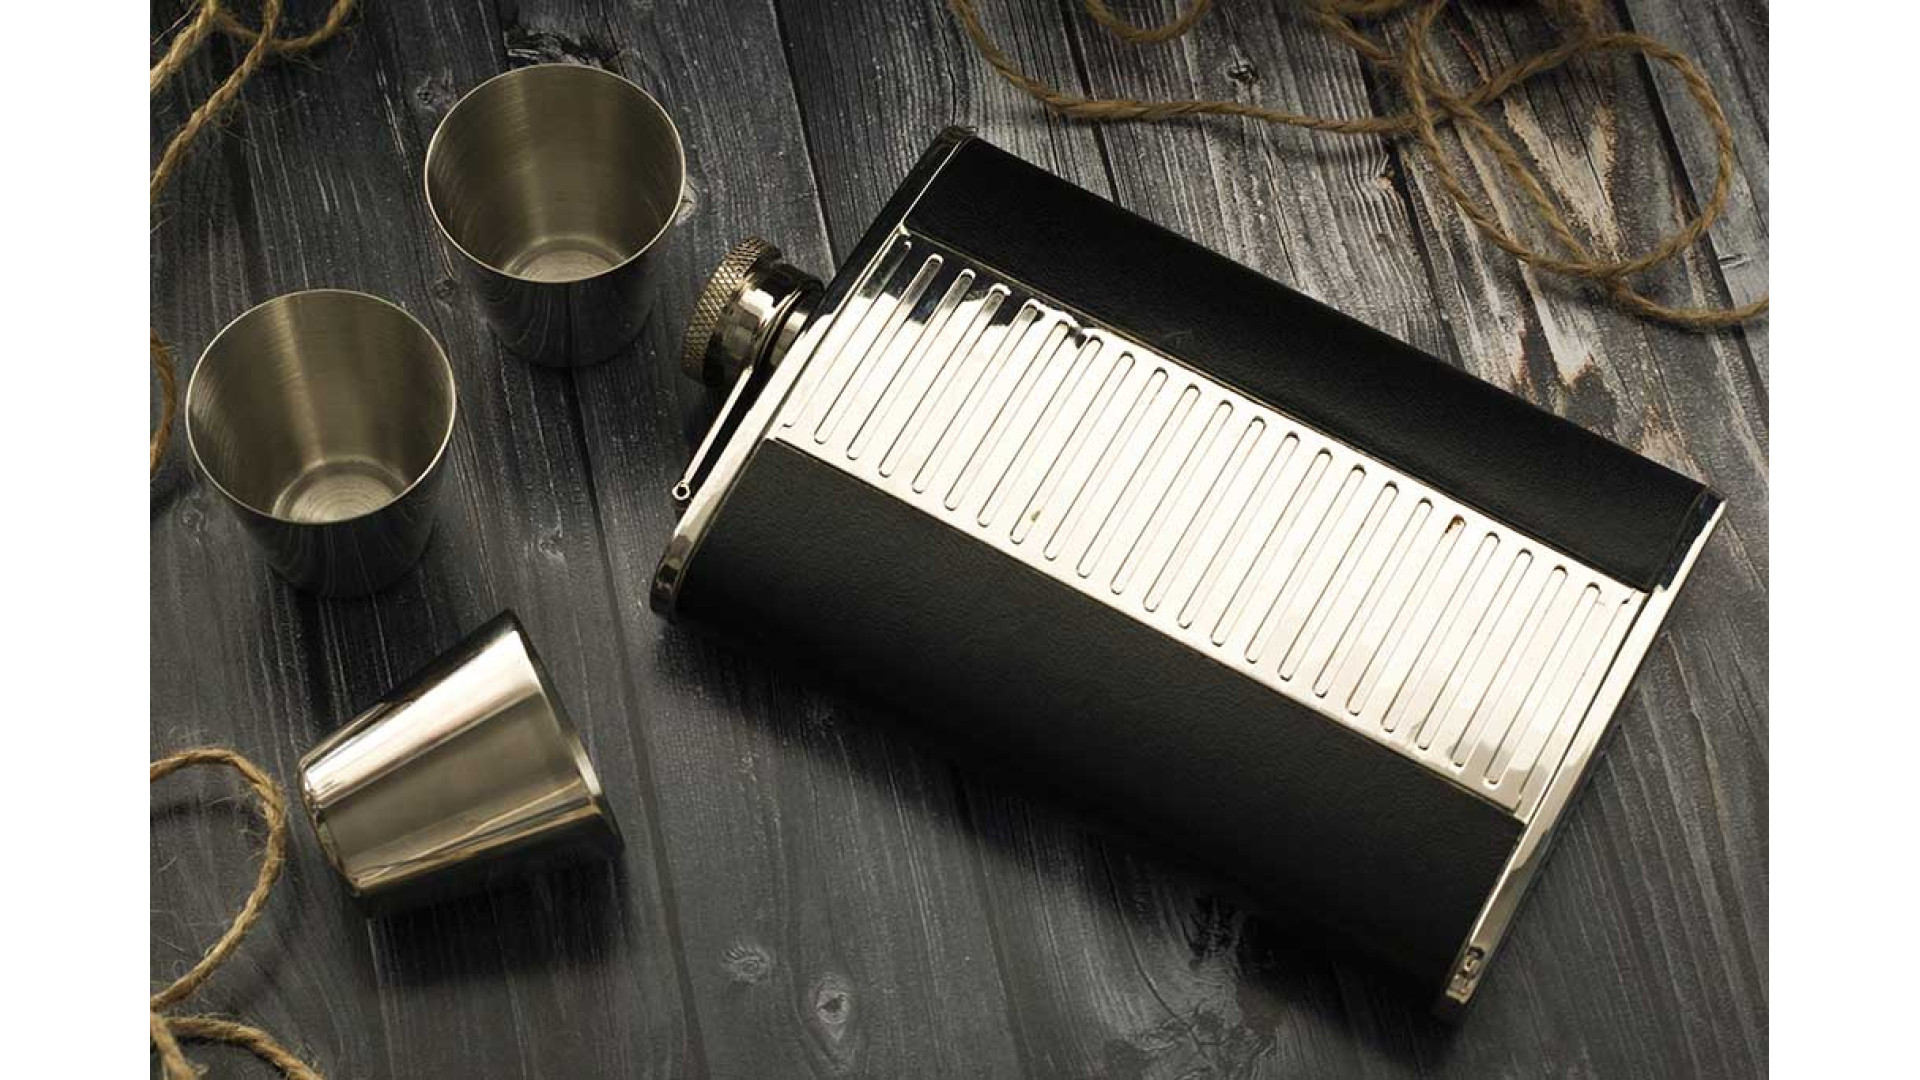 https://www.ckbproducts.com/image/cache/catalog/Ckb%20blog/taking-care-of-your-hip-flask-1920x1080.jpg